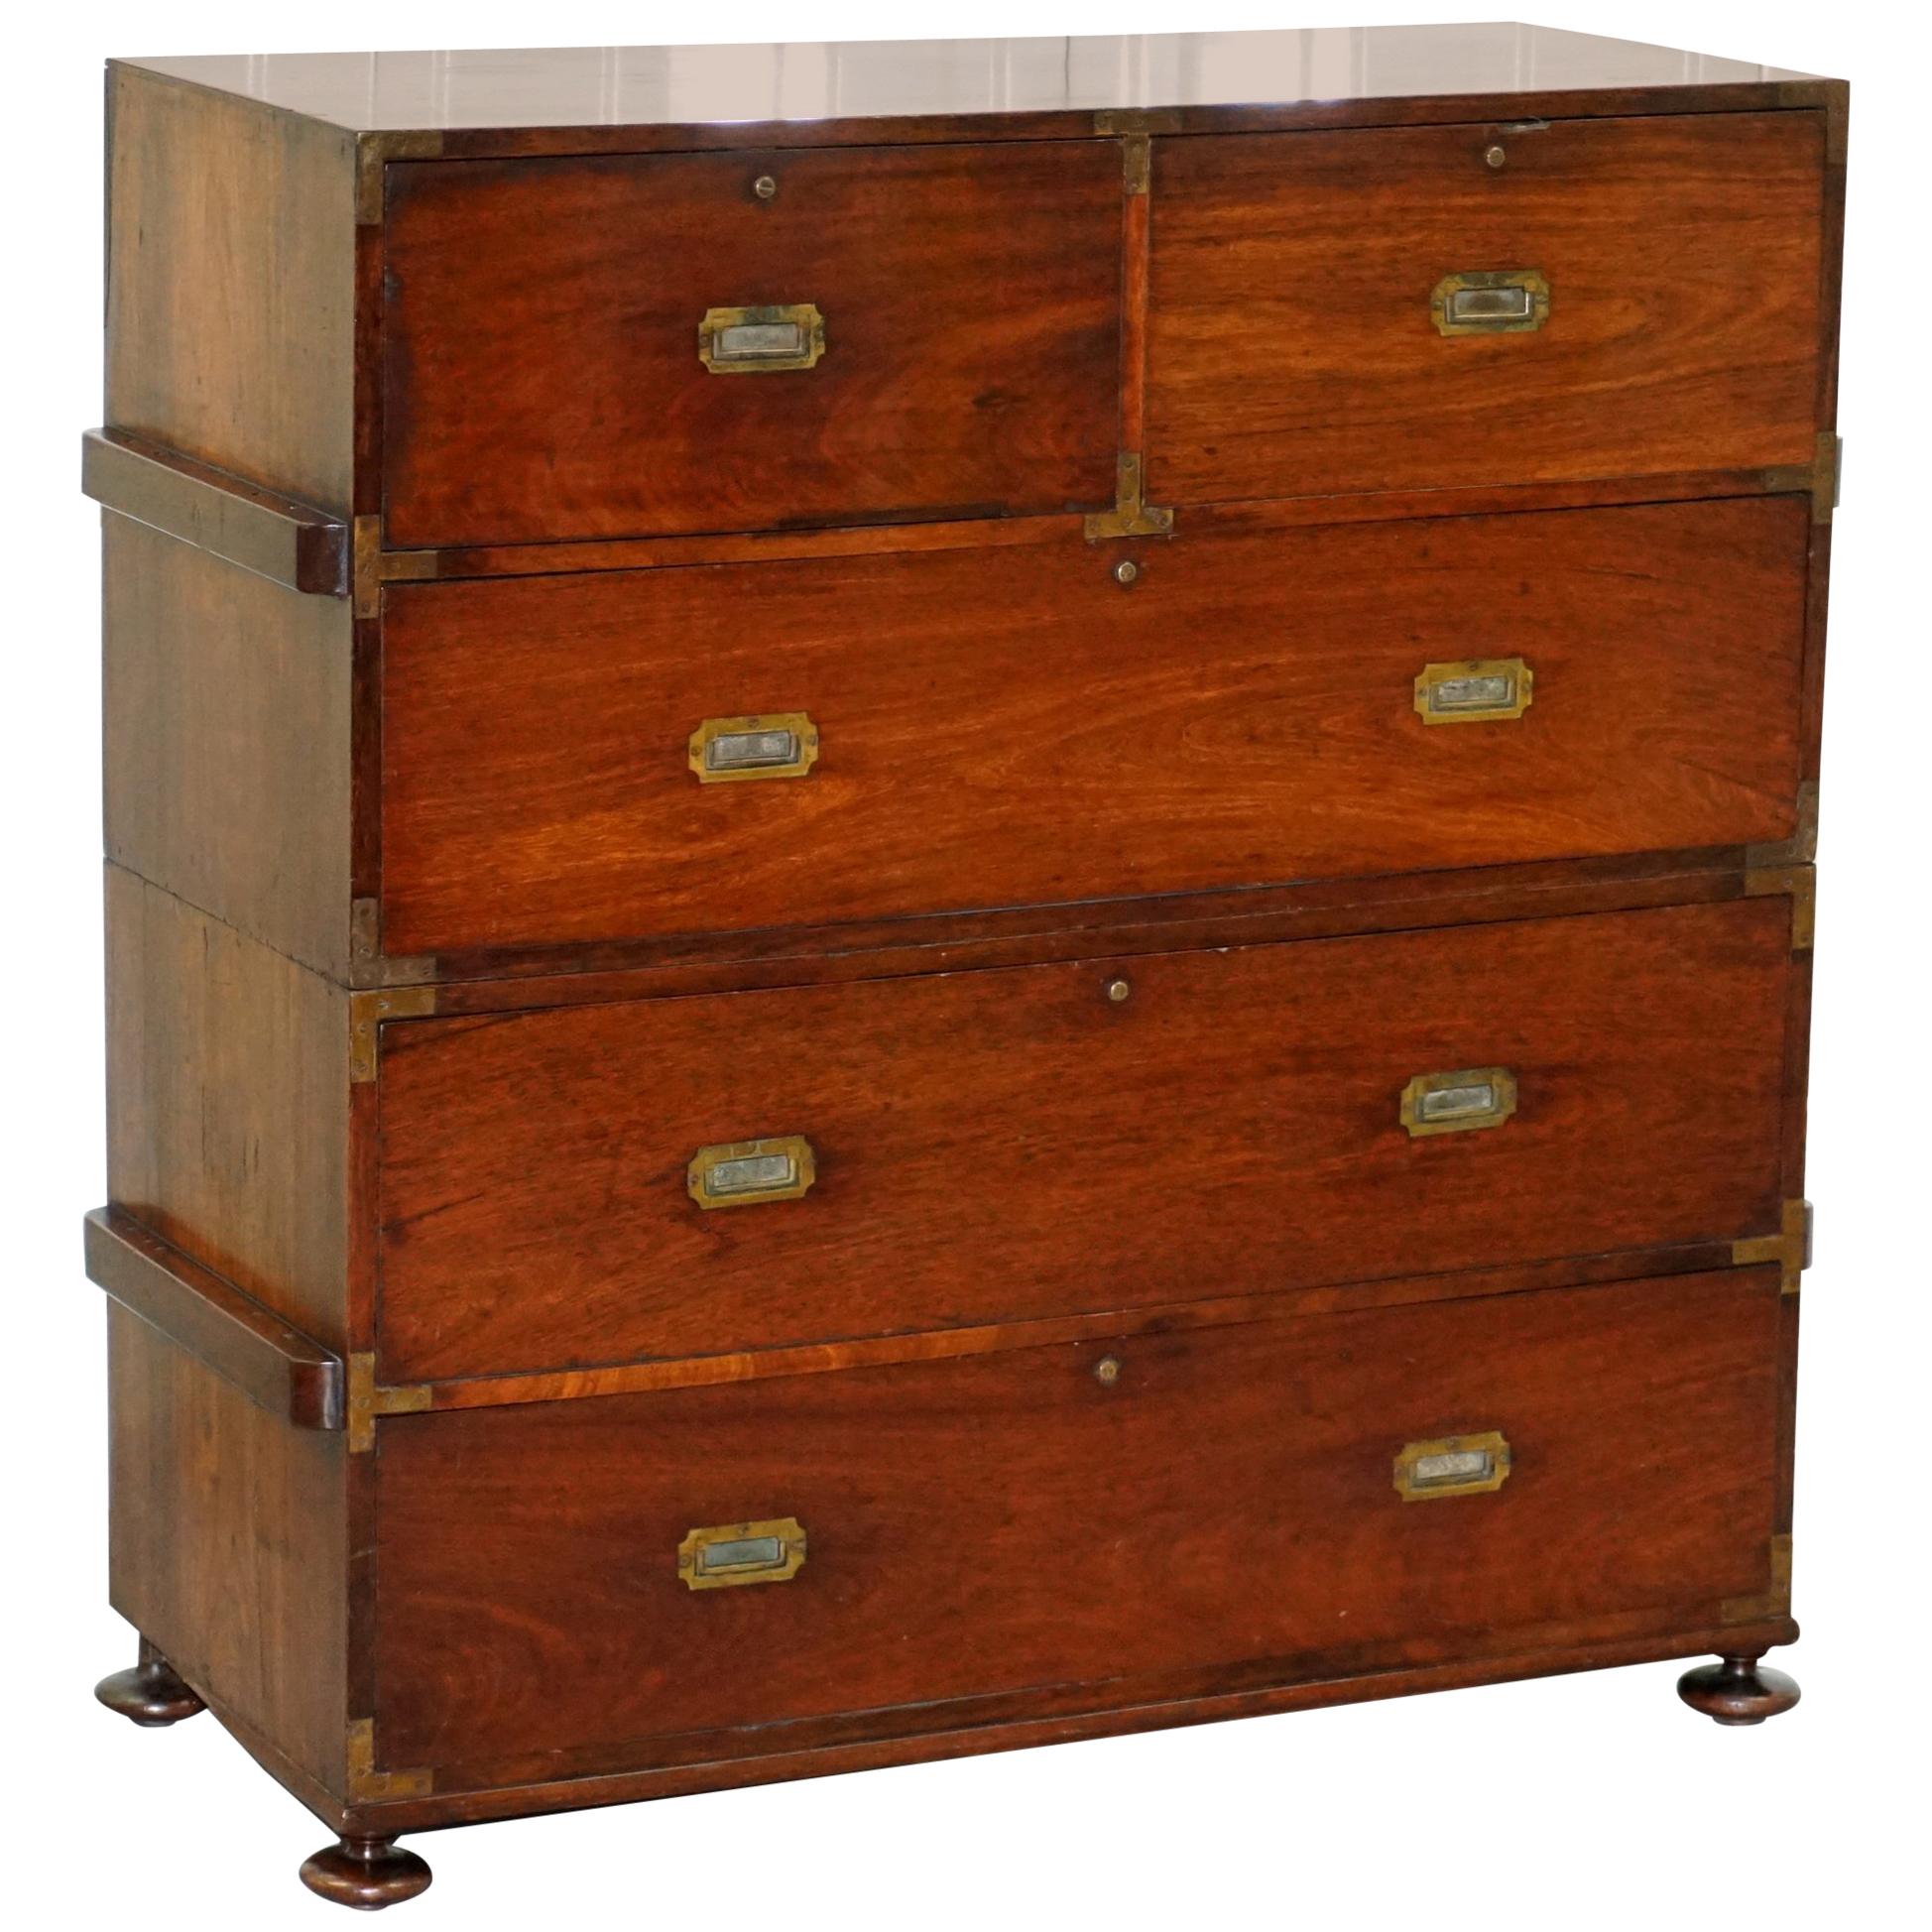 Feb 1st 1876 Stamped Camphor Wood Military Campaign Chest of Drawers Secrataire